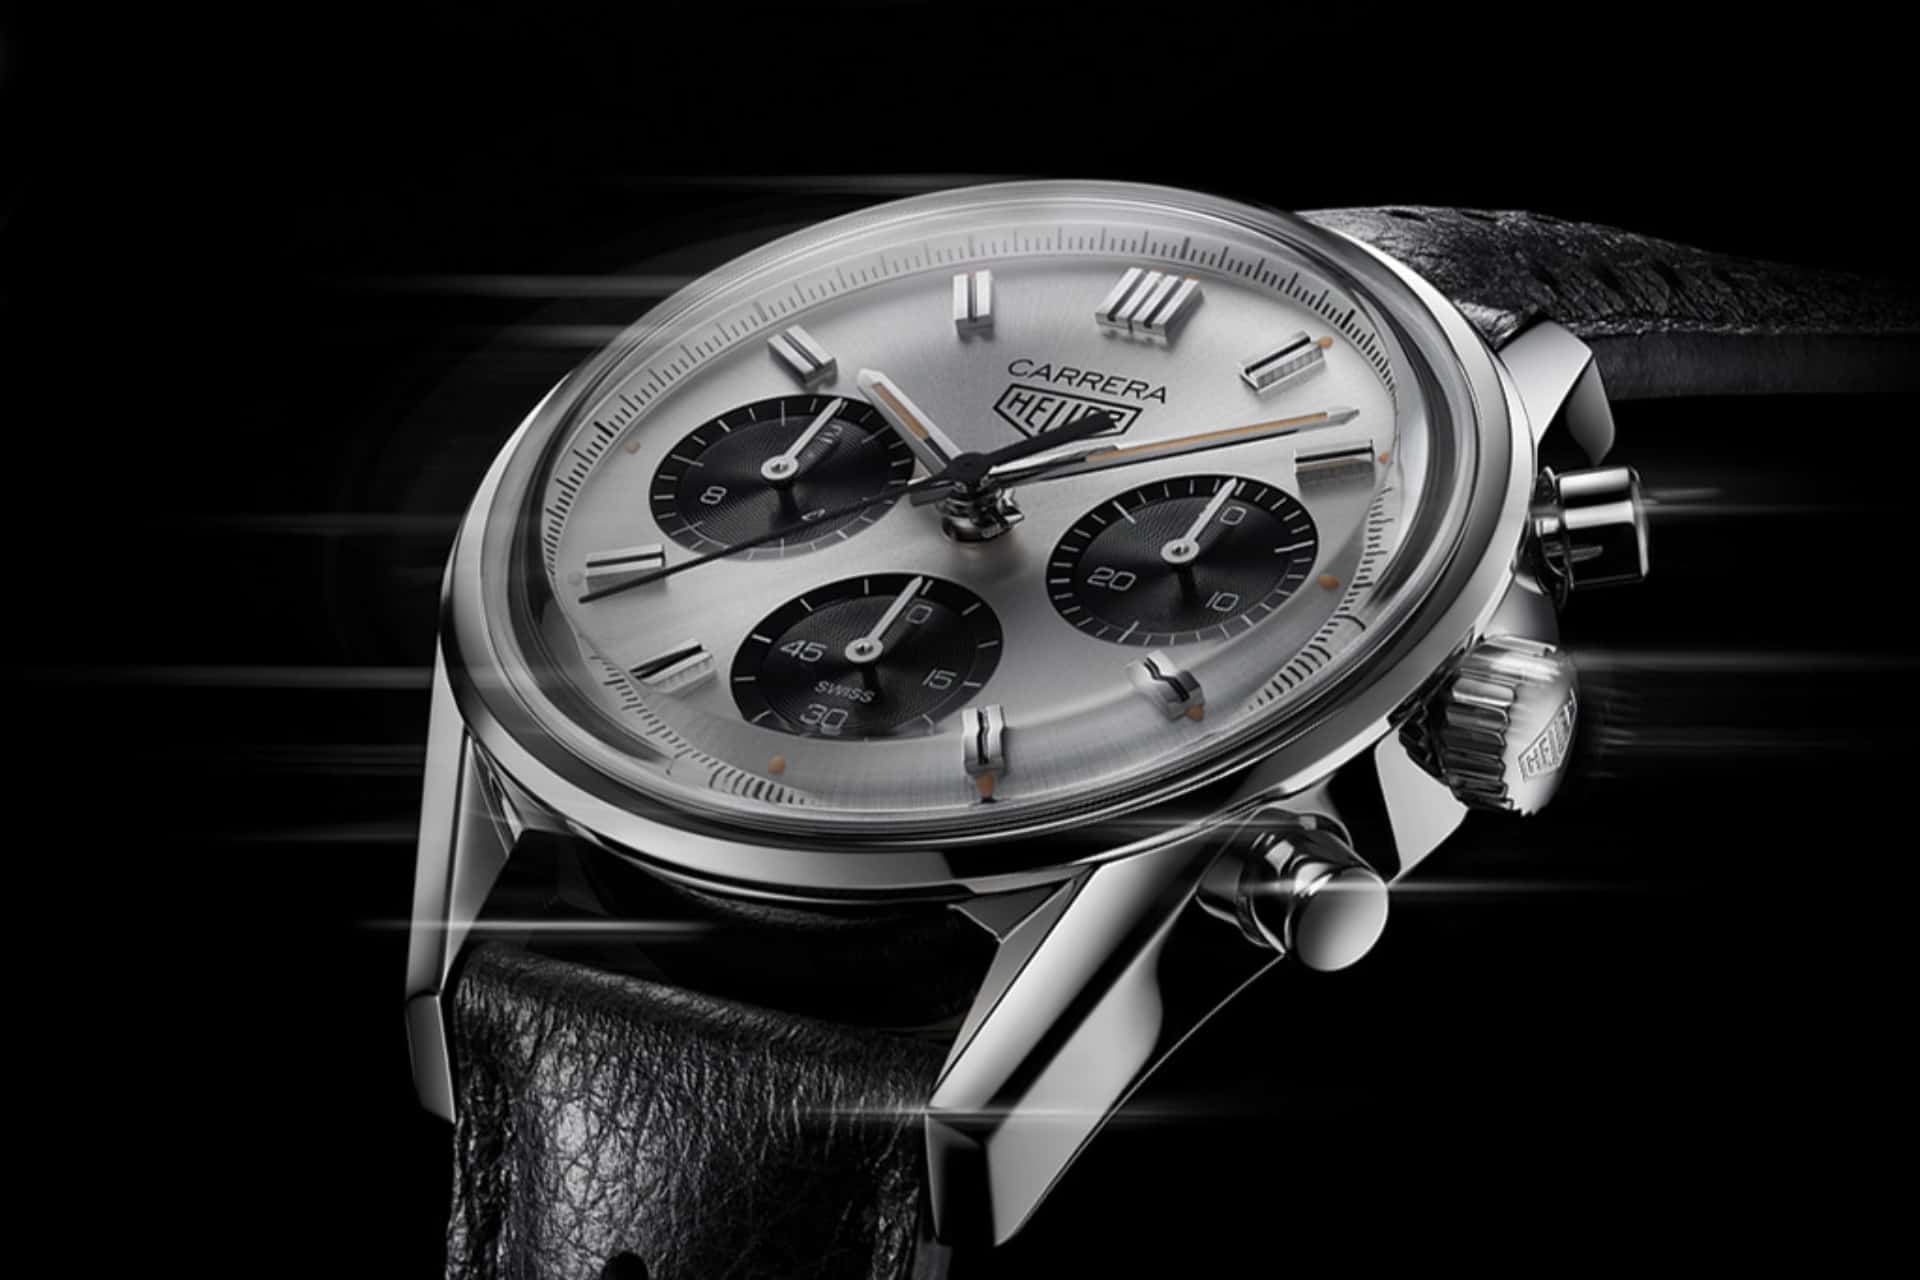 Introducing the TAG Heuer Carrera Chronograph 60th Anniversary